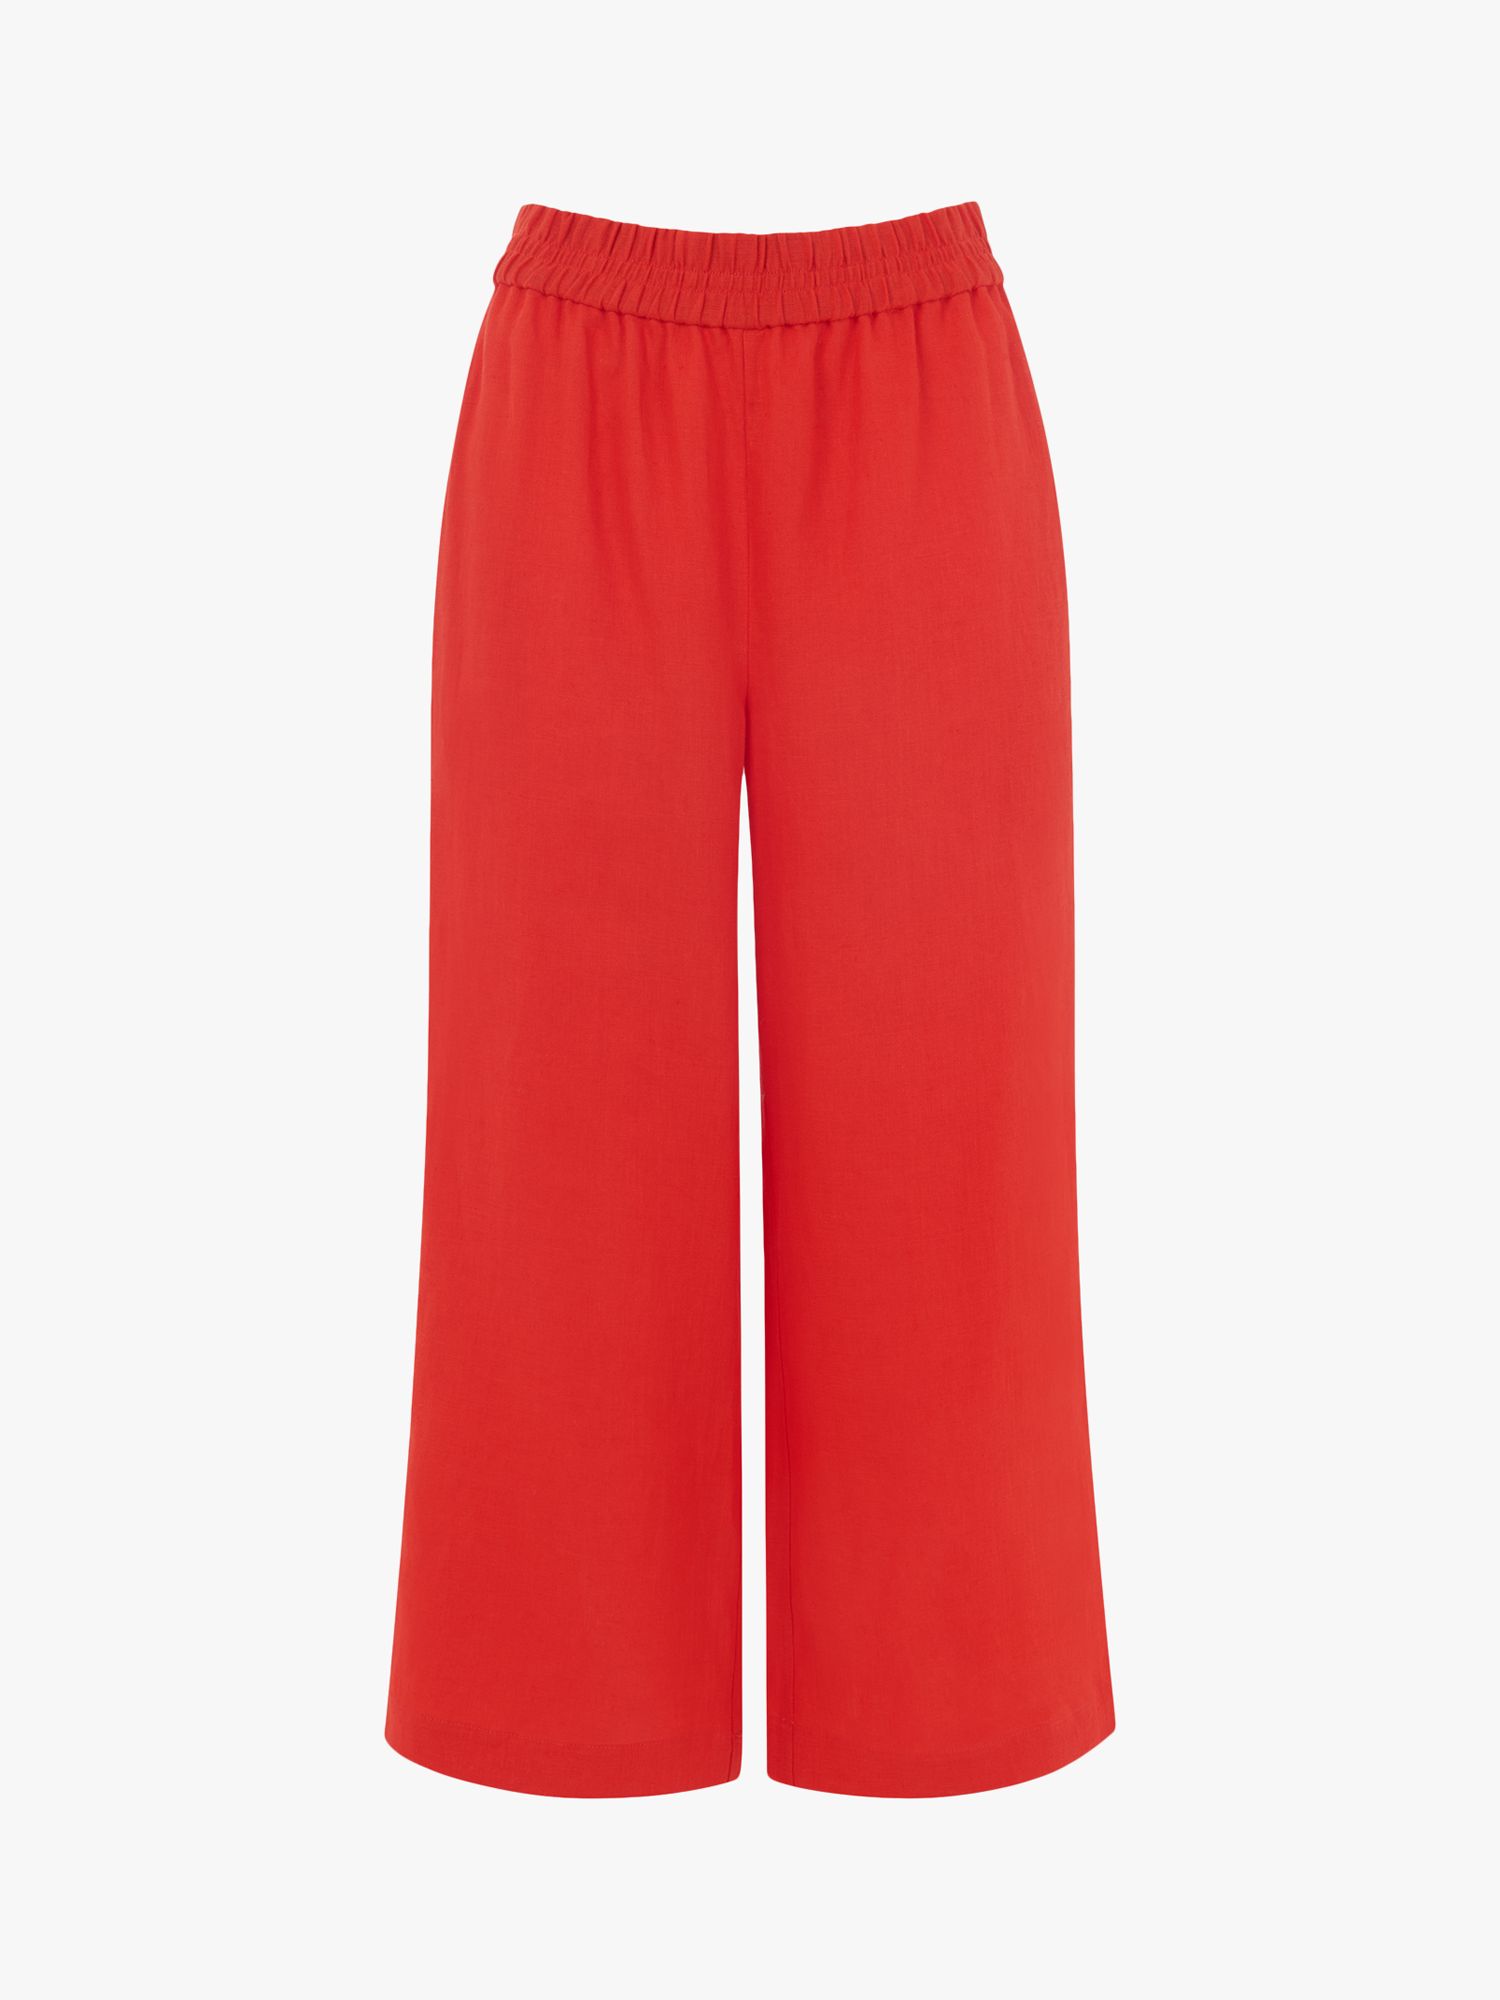 Whistles Linen Pocket Wide Leg Trousers, Red at John Lewis & Partners